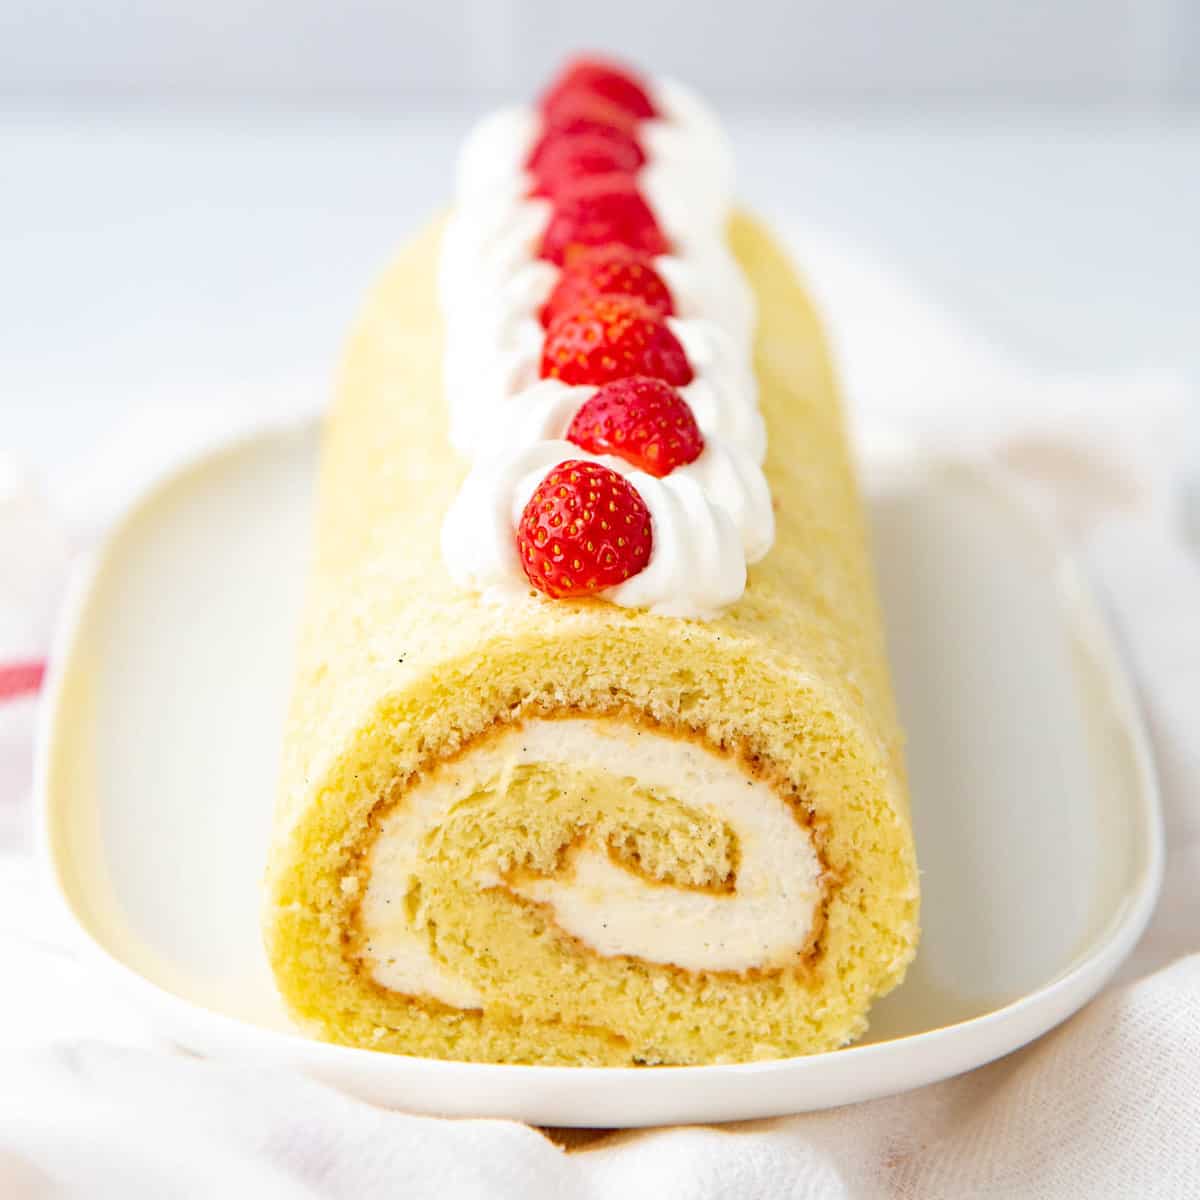 How To Make Jelly Roll Cake.